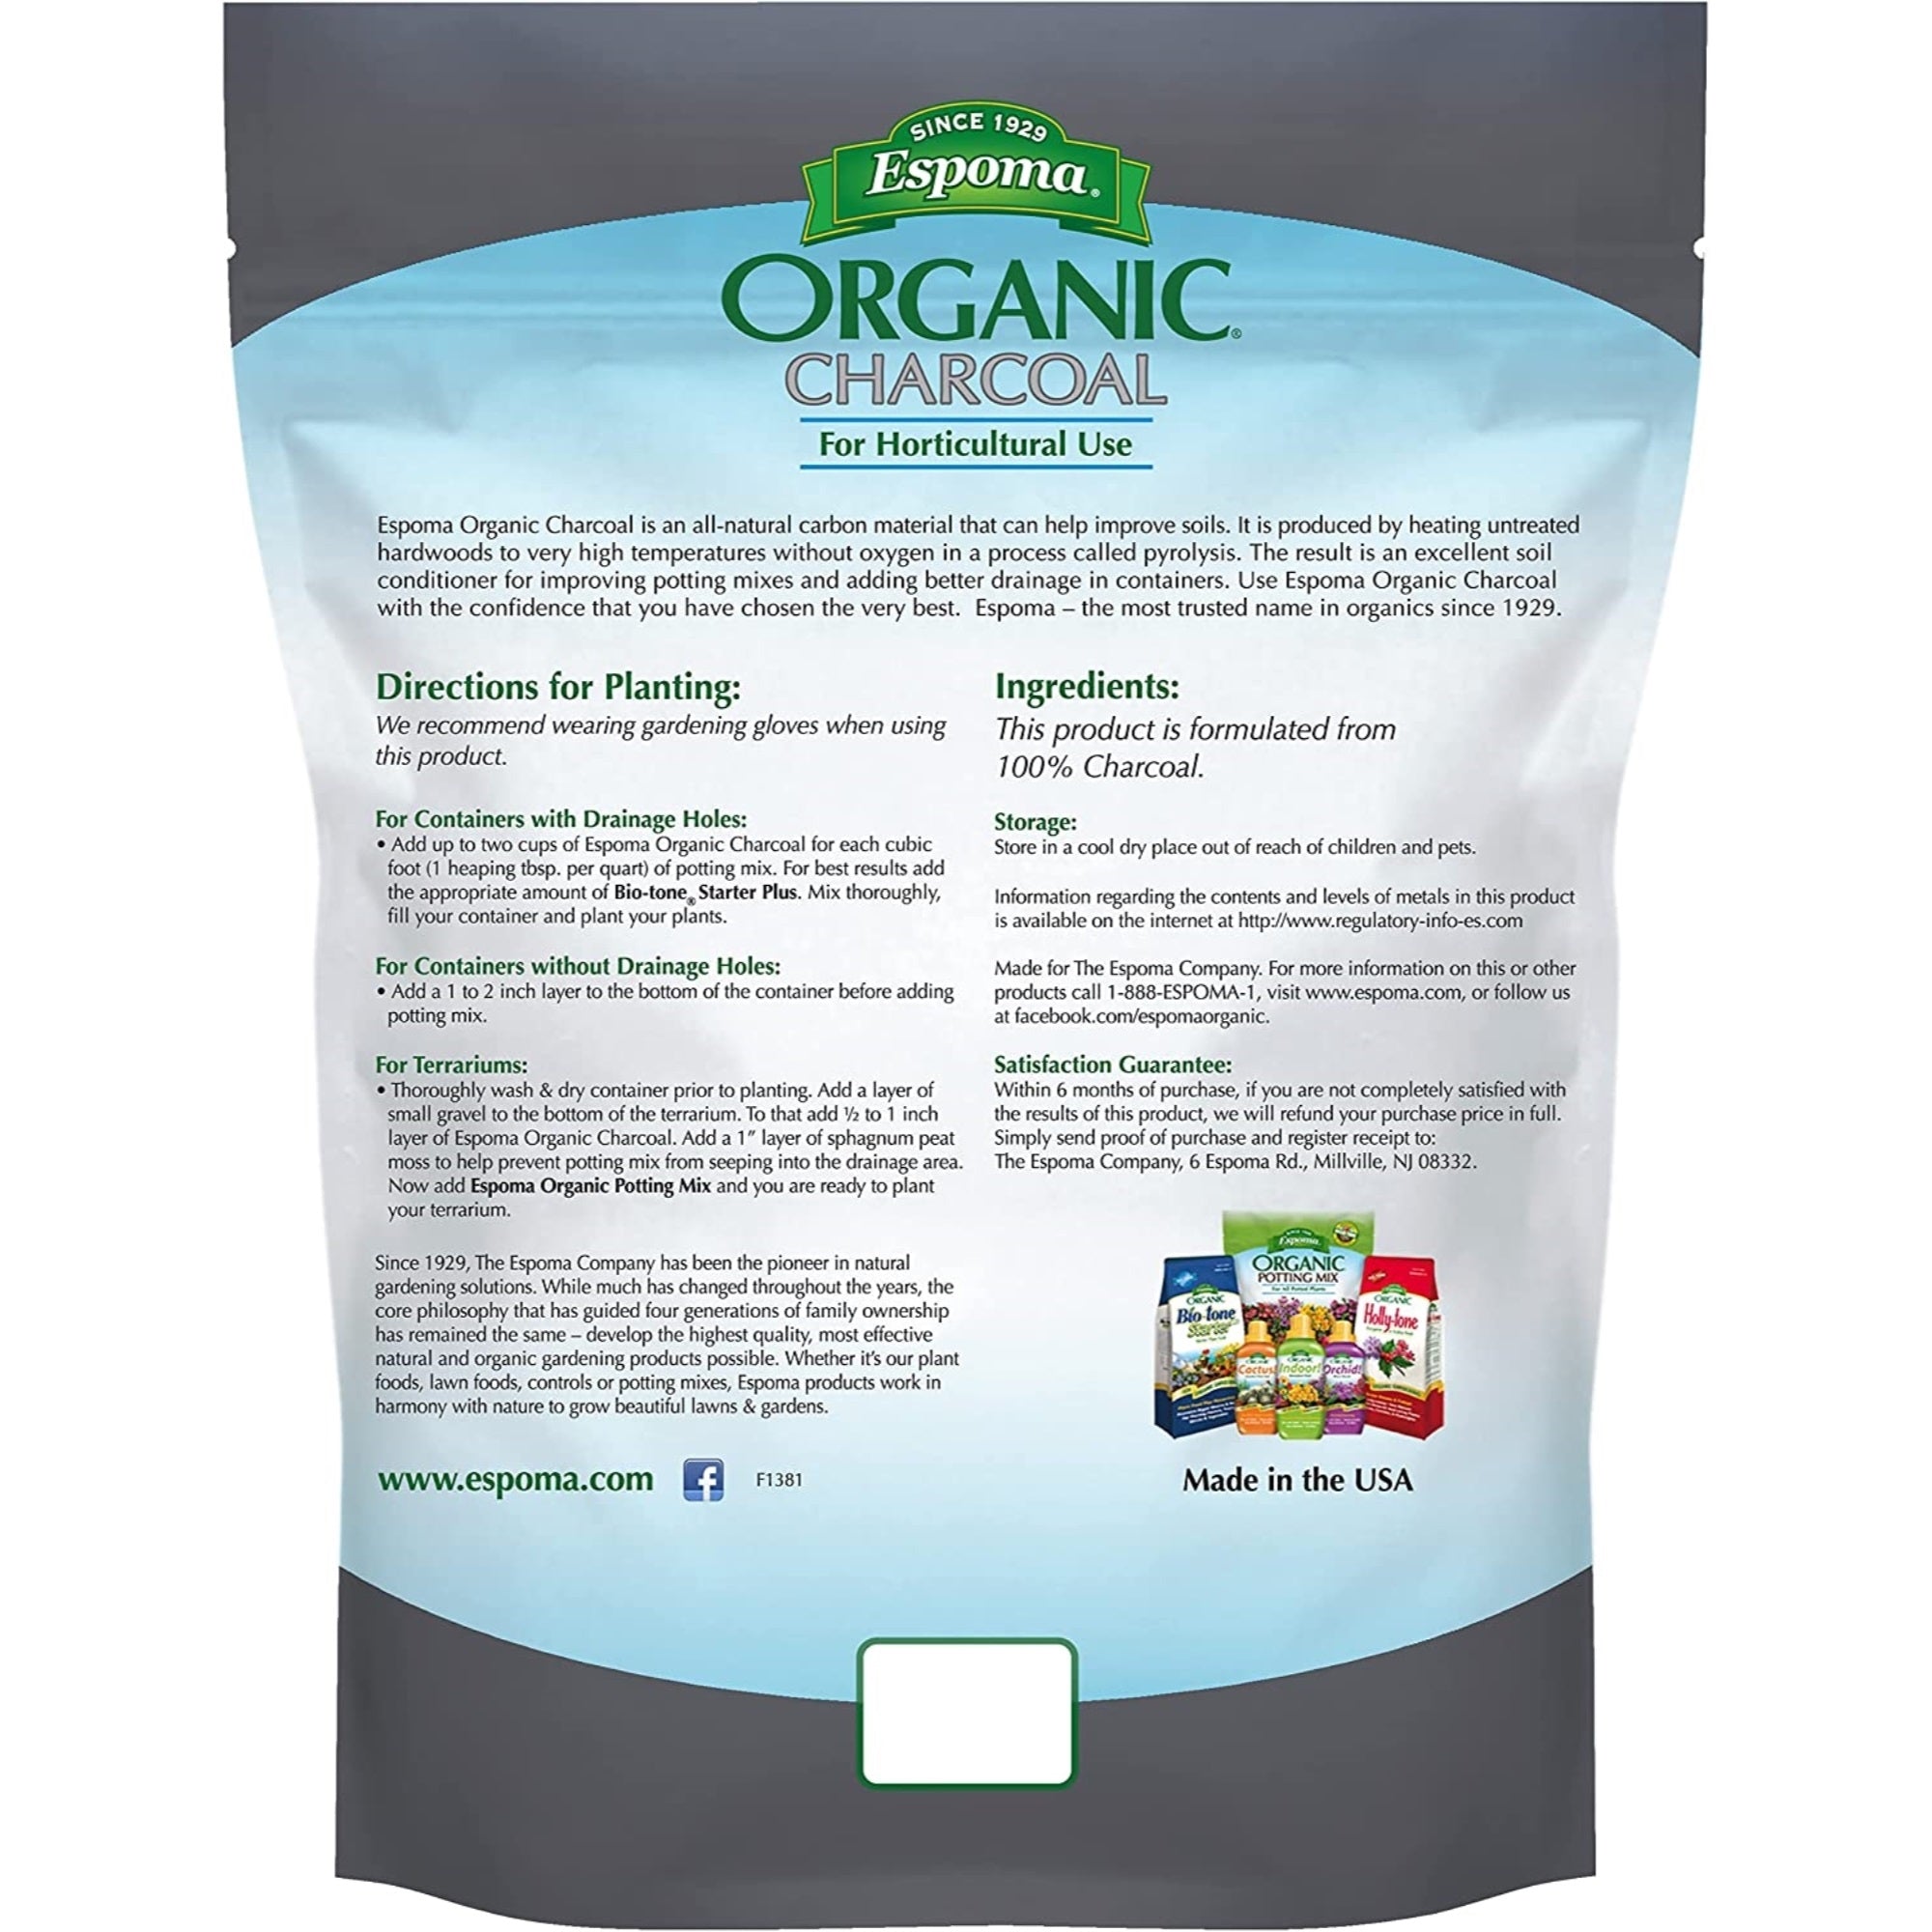 Espoma Organic Charcoal for Horticultural Use, All Natural Charcoal For Organic Gardening, Helps Improve Drainage in Containers and Terrariums, 4 Qt Bag